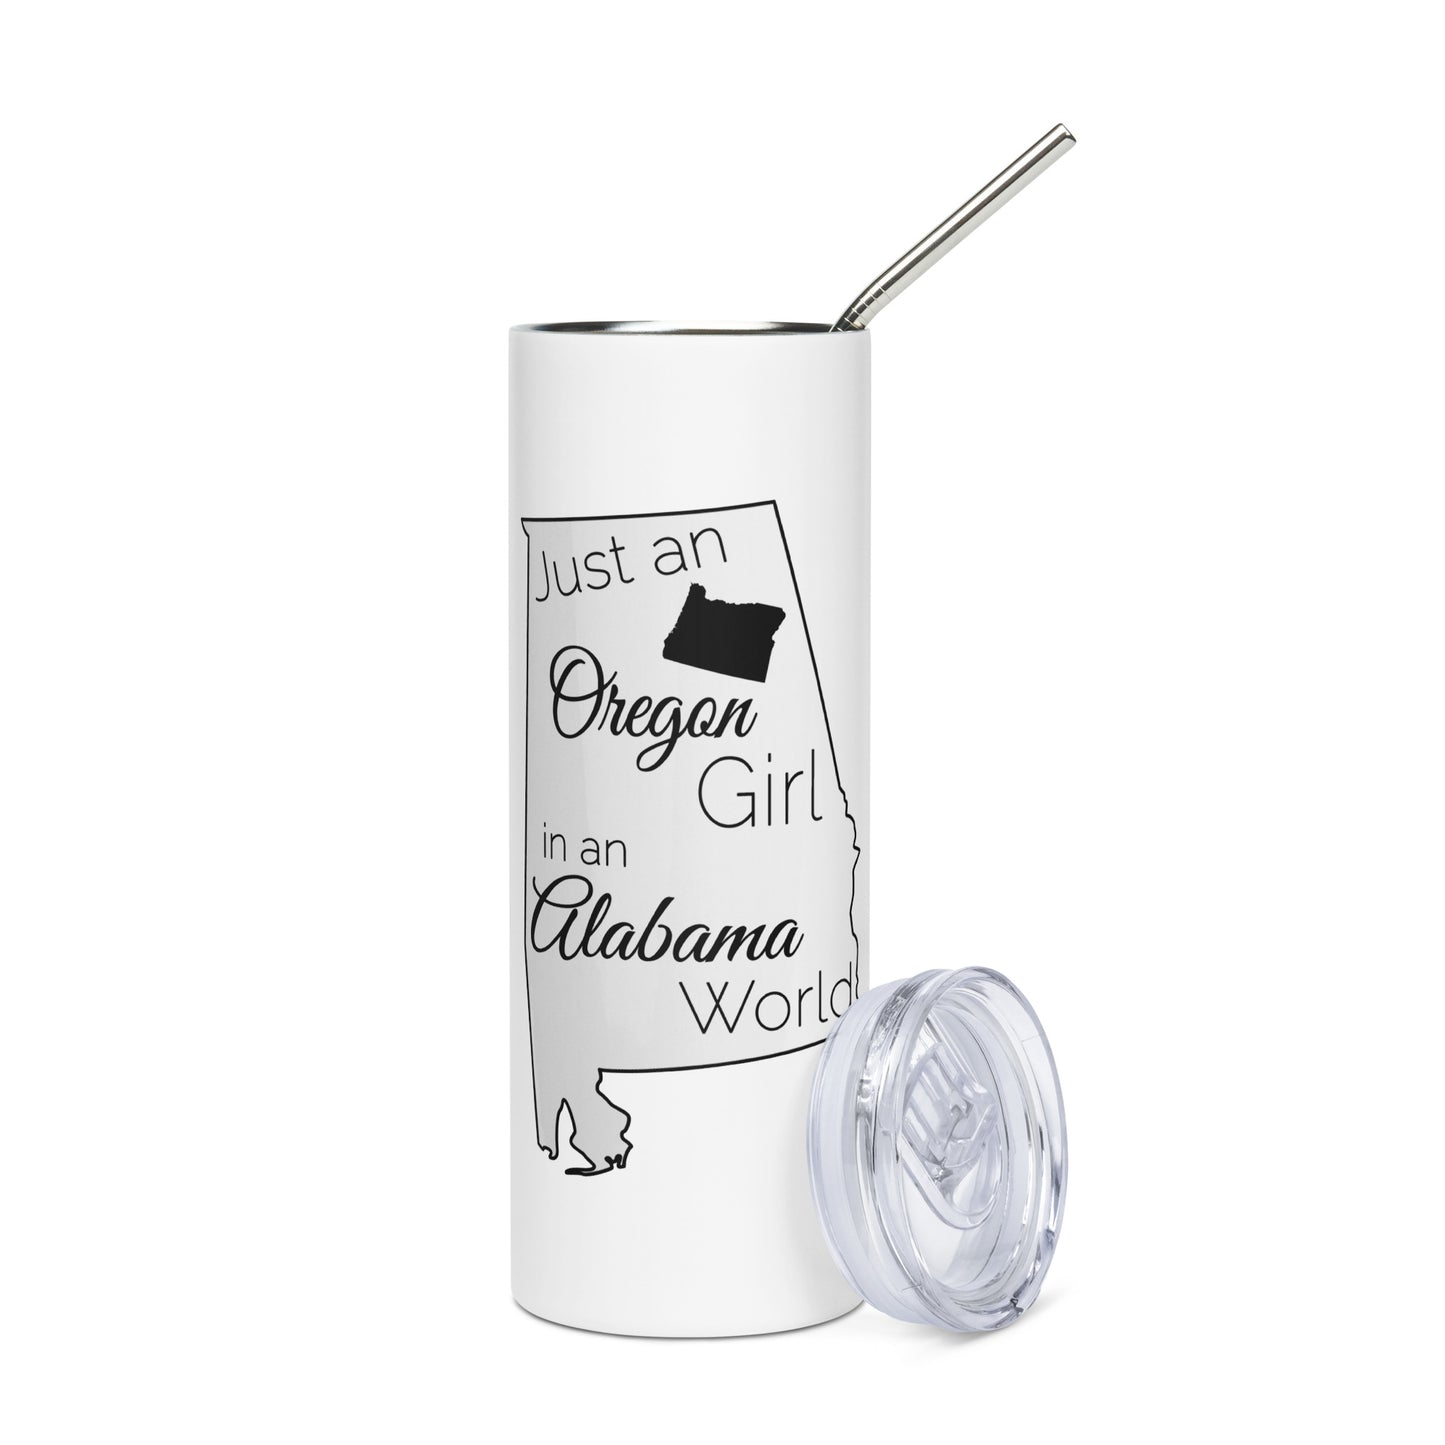 Just an Oregon Girl in an Alabama World Stainless steel tumbler